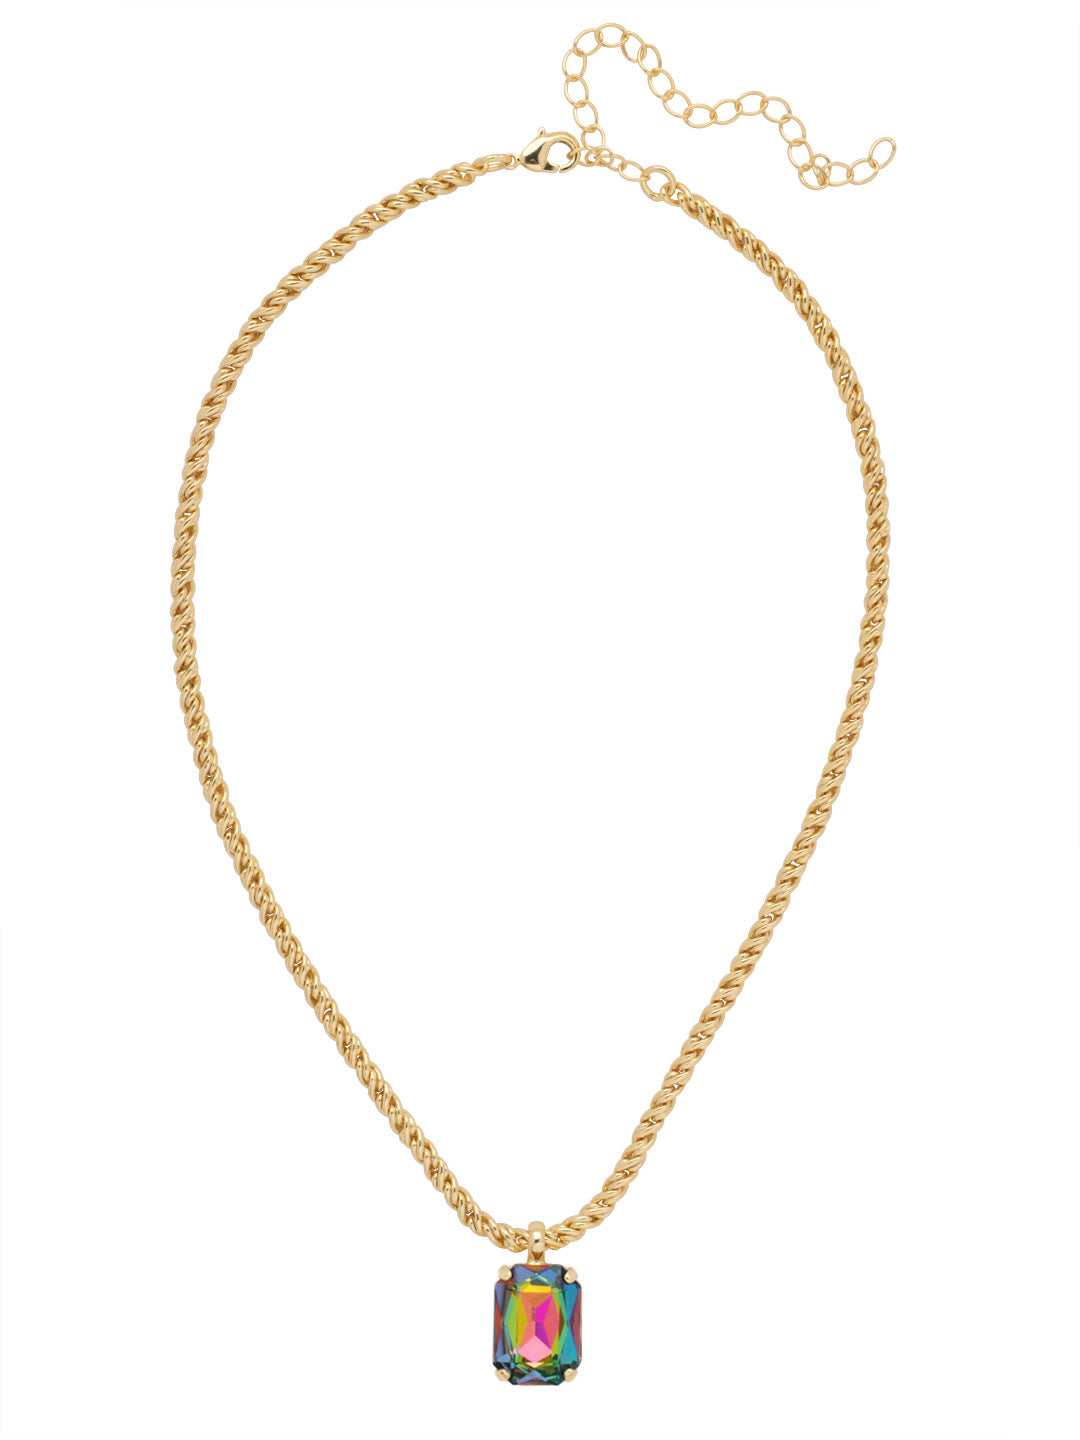 Kathleen Pendant Necklace - NFF8BGVO - <p>The Kathleen Pendant Necklace features a trendy emerald cut candy gem on an adjustable rope chain, secured by a lobster claw clasp. From Sorrelli's Volcano collection in our Bright Gold-tone finish.</p>